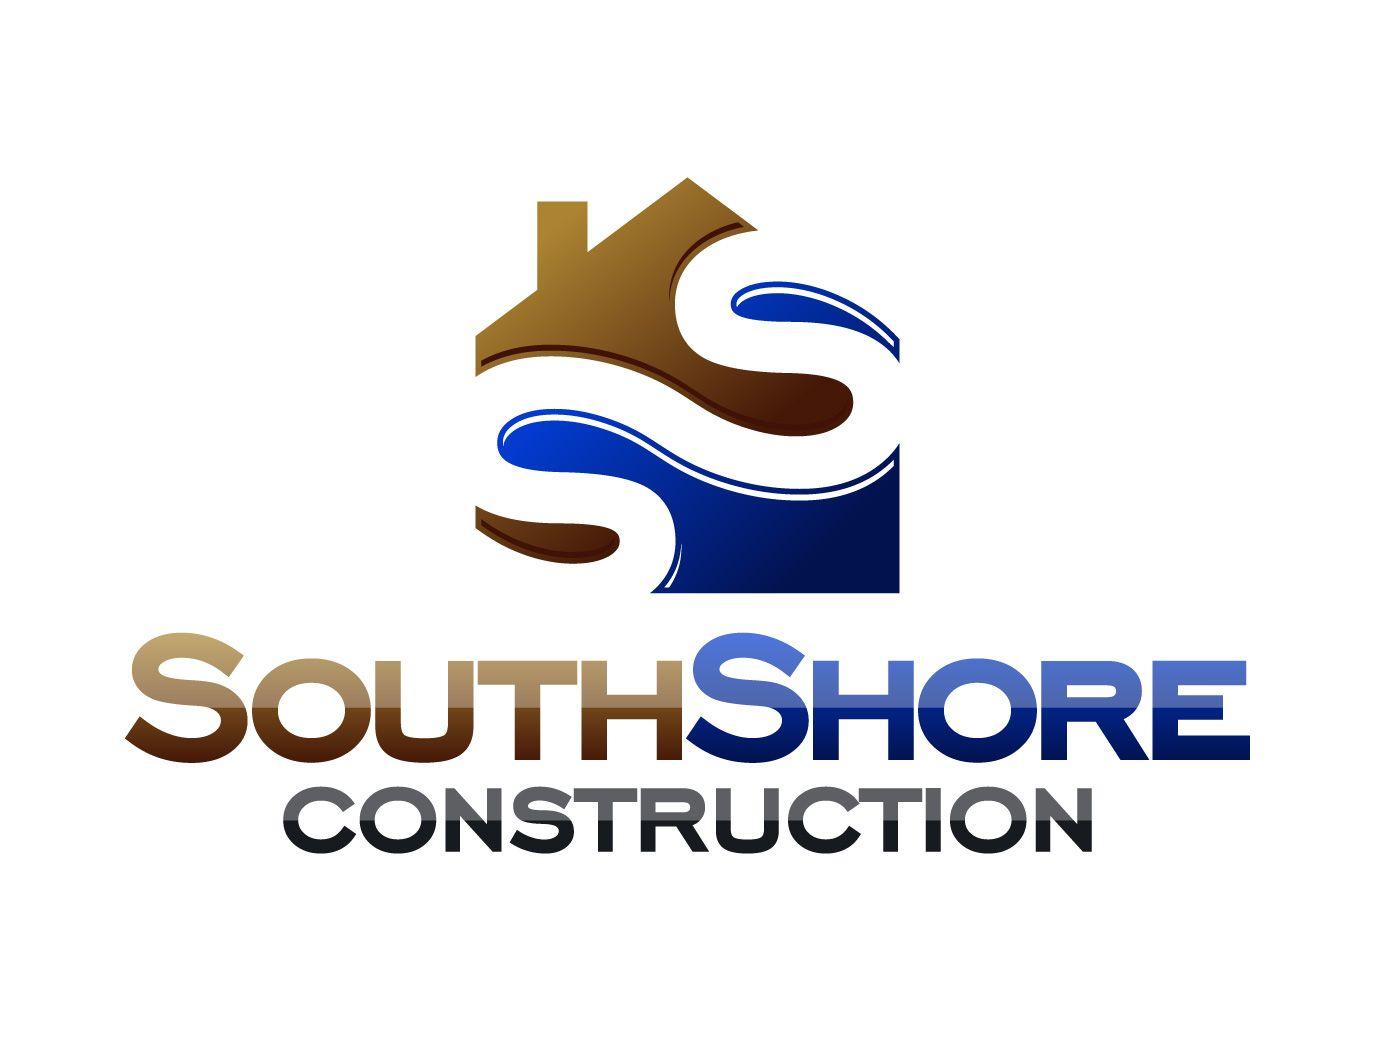 General Contractor Construction Company Logo - Do You Have A Logo For Your General Contracting Business?